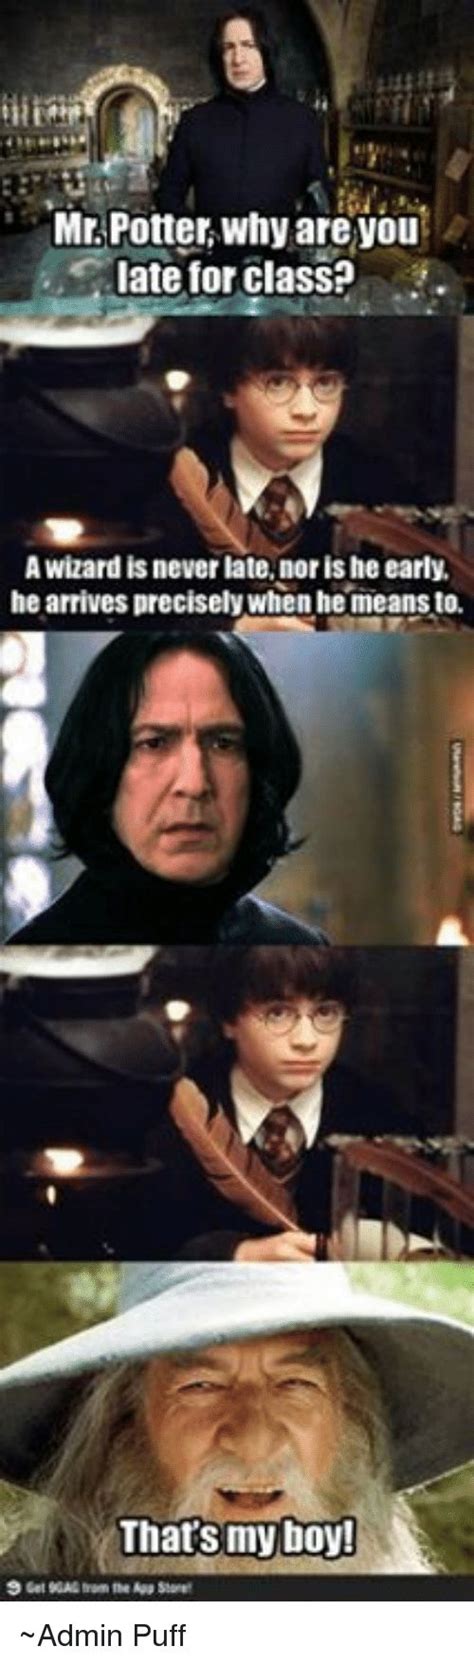 Image Result For Mr Potter Why Are You Late For Class A Wizard Is Never Late Harry Potter